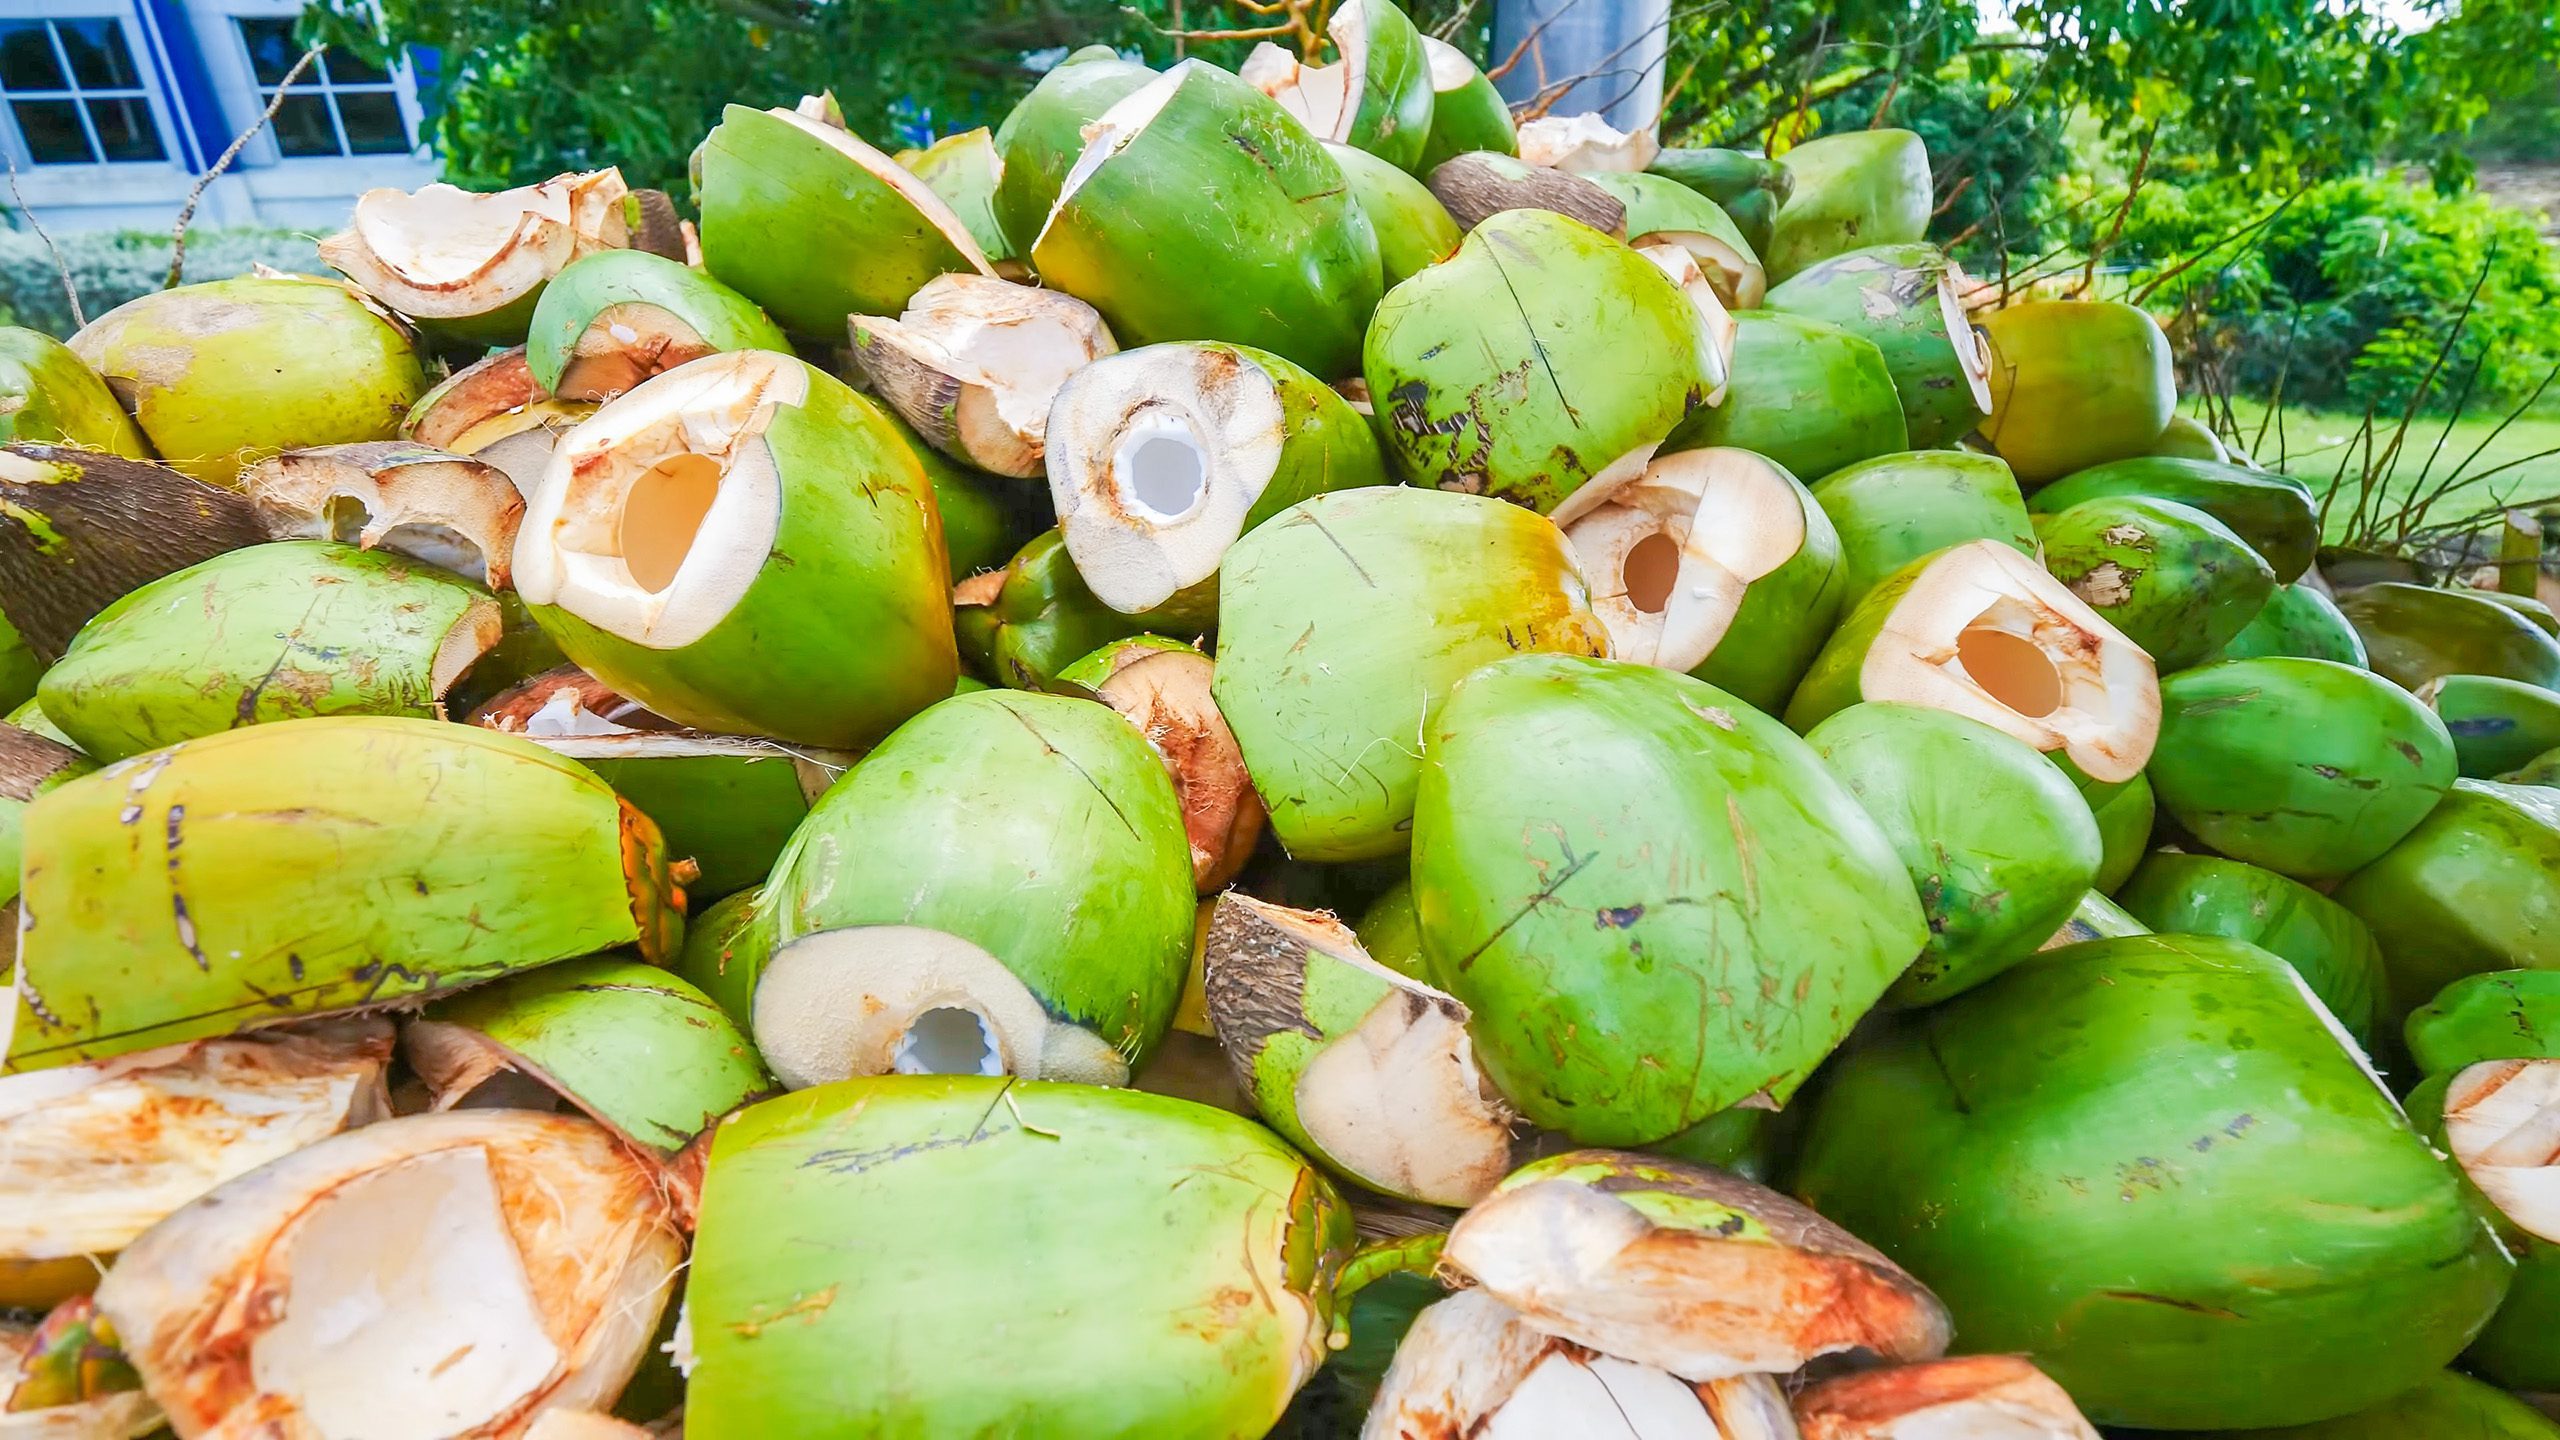 A pile of fresh coconuts in Barbados | Davidsbeenhere